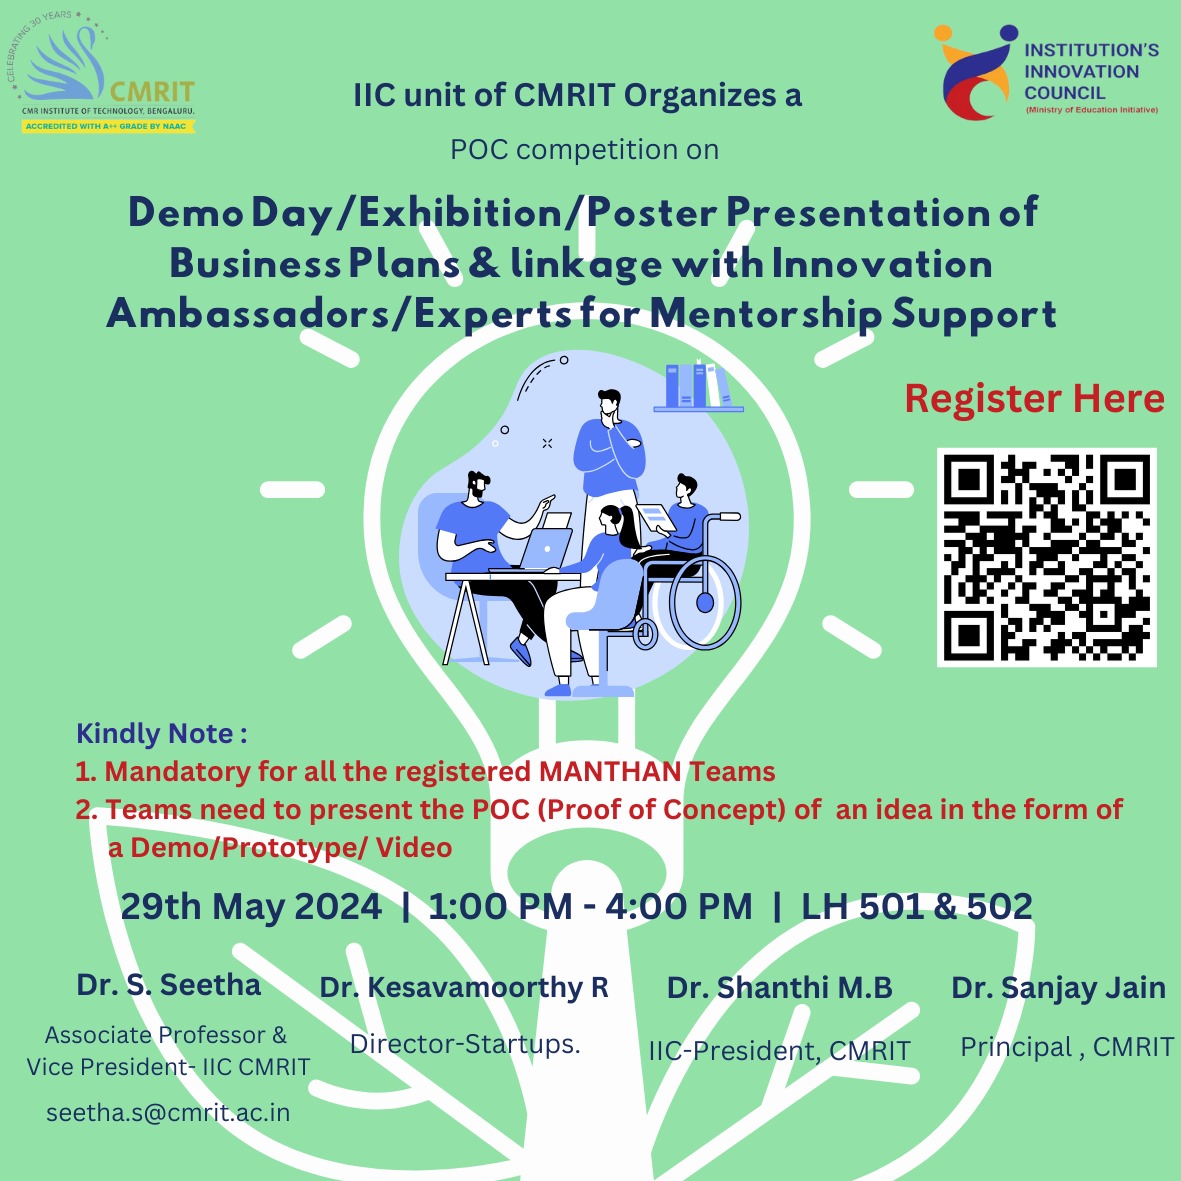 IIC-CMRIT is organizing a POC Competition on Demo Day/Exhibition/Poster Presentation of Business Plans & linkage with Innovation Ambassadors/Experts for Mentorship Support on 29th May 2024.

Registration Link:
forms.gle/XsS1JpG9LmFEm9…

@mhrd_innovation

#cmritbengaluru #cmrit